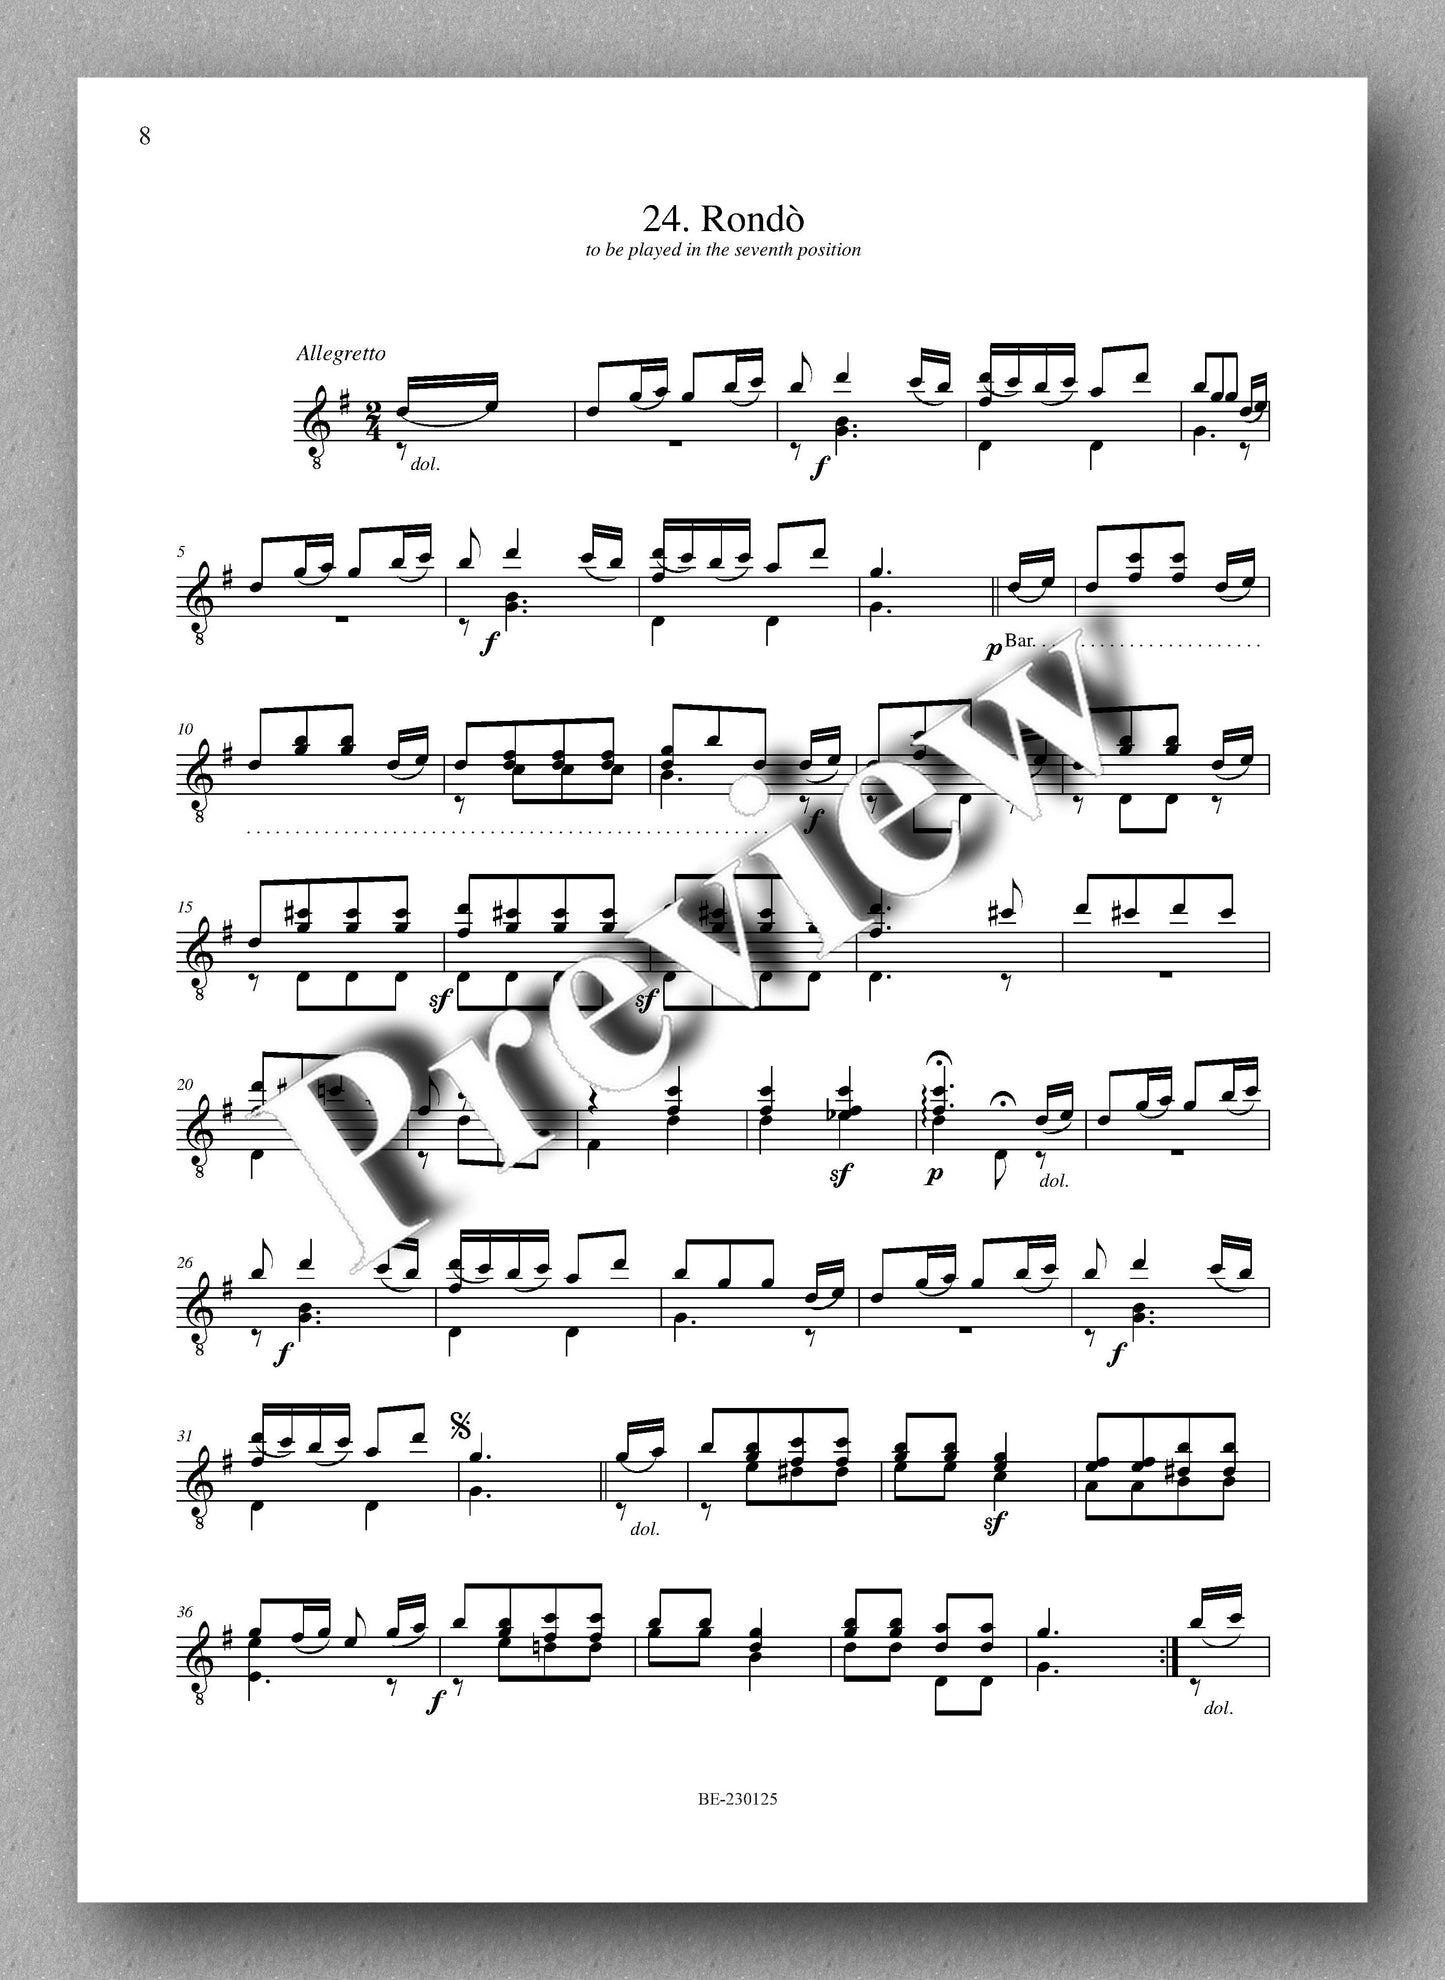 Molino, Collected Works for Guitar Solo, Vol. 37 - preview of the music score 2